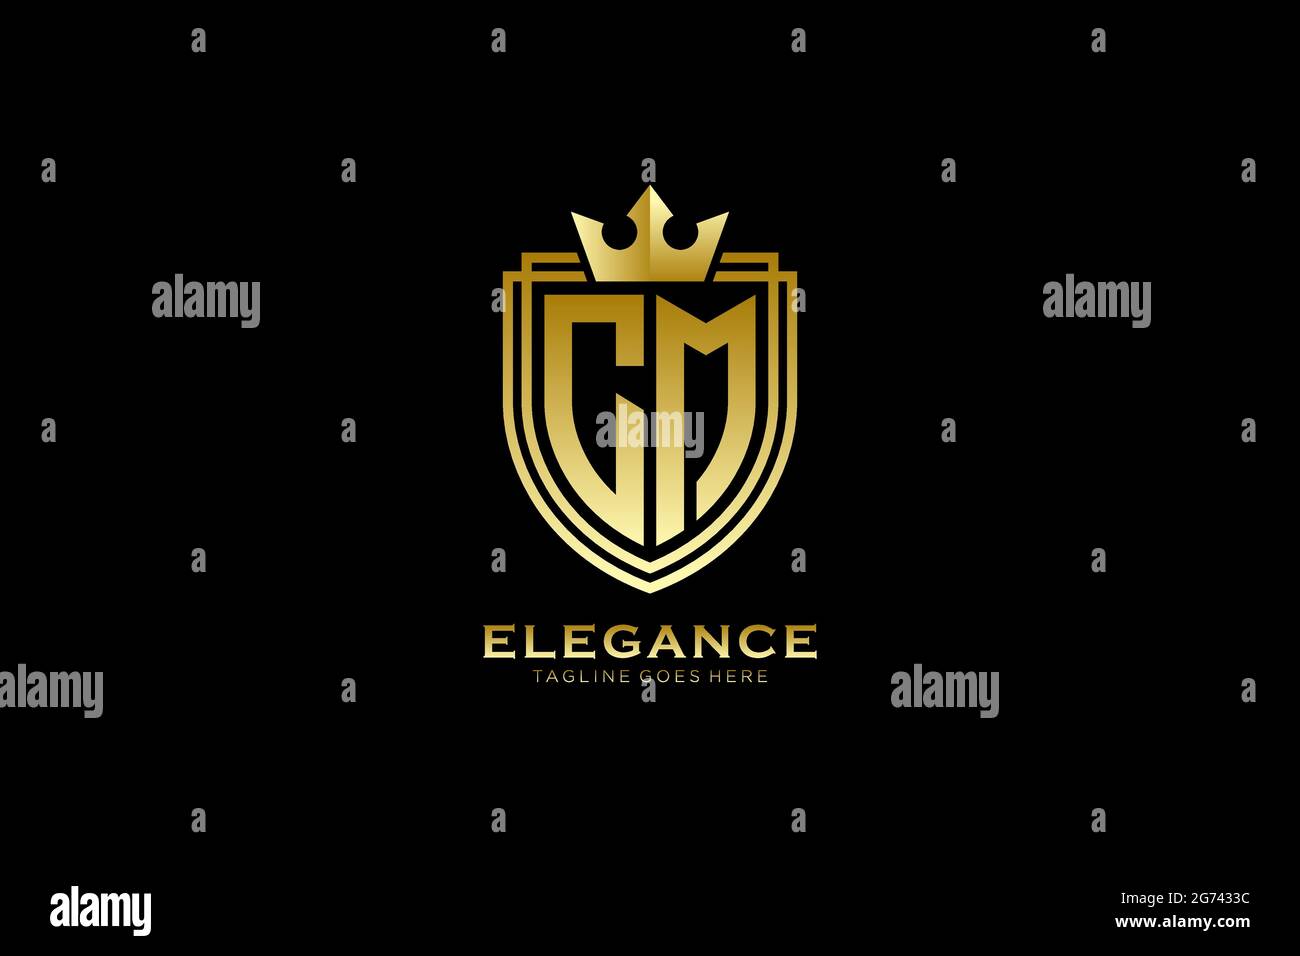 CM elegant luxury monogram logo or badge template with scrolls and royal crown - perfect for luxurious branding projects Stock Vector